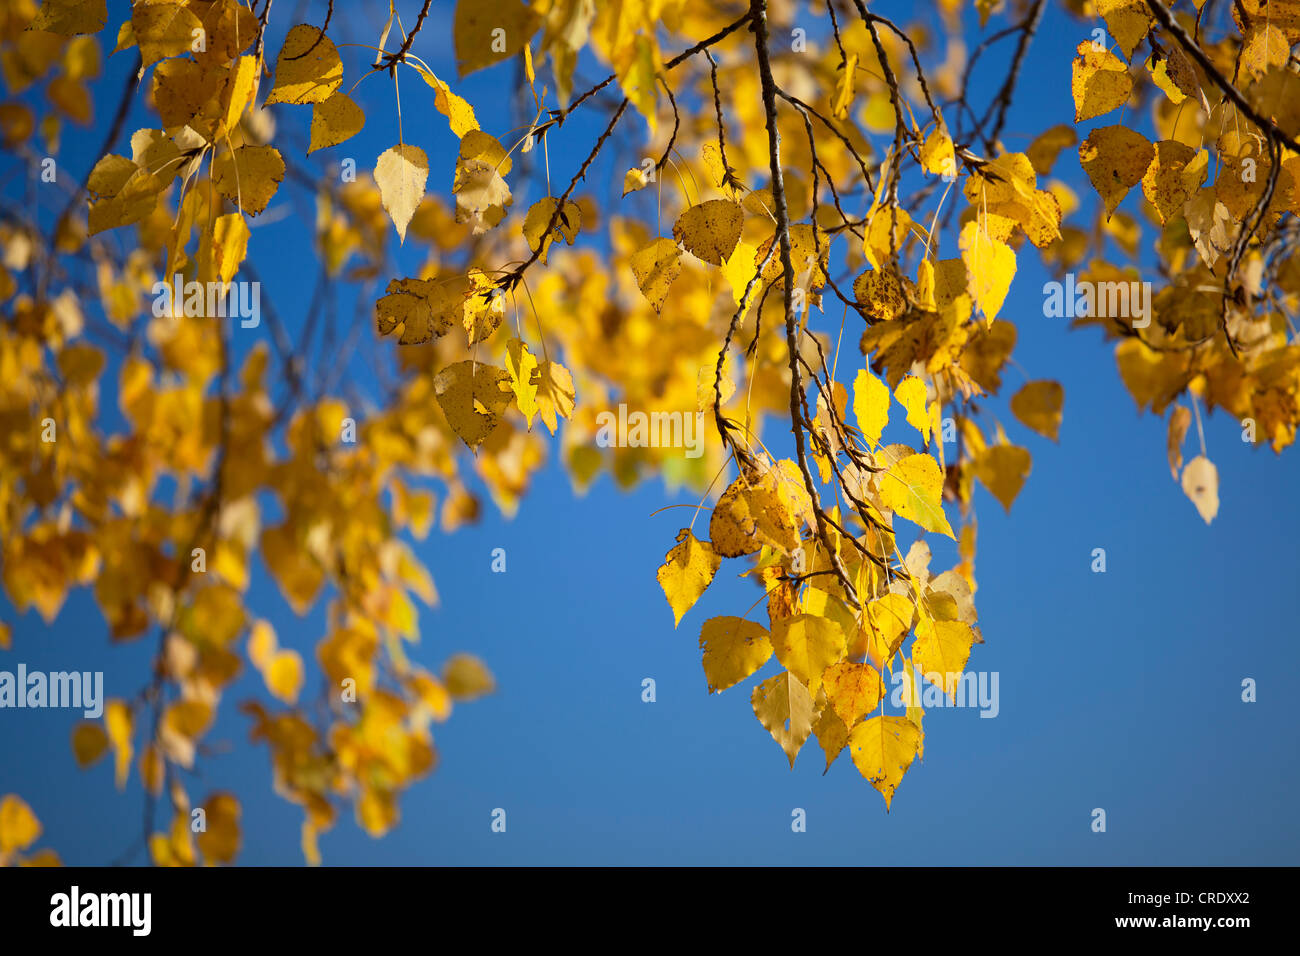 Autumnal leaves of a lime tree (Tilia) against a blue sky, Markelfingen, Baden-Wuerttemberg, Germany, Europe Stock Photo